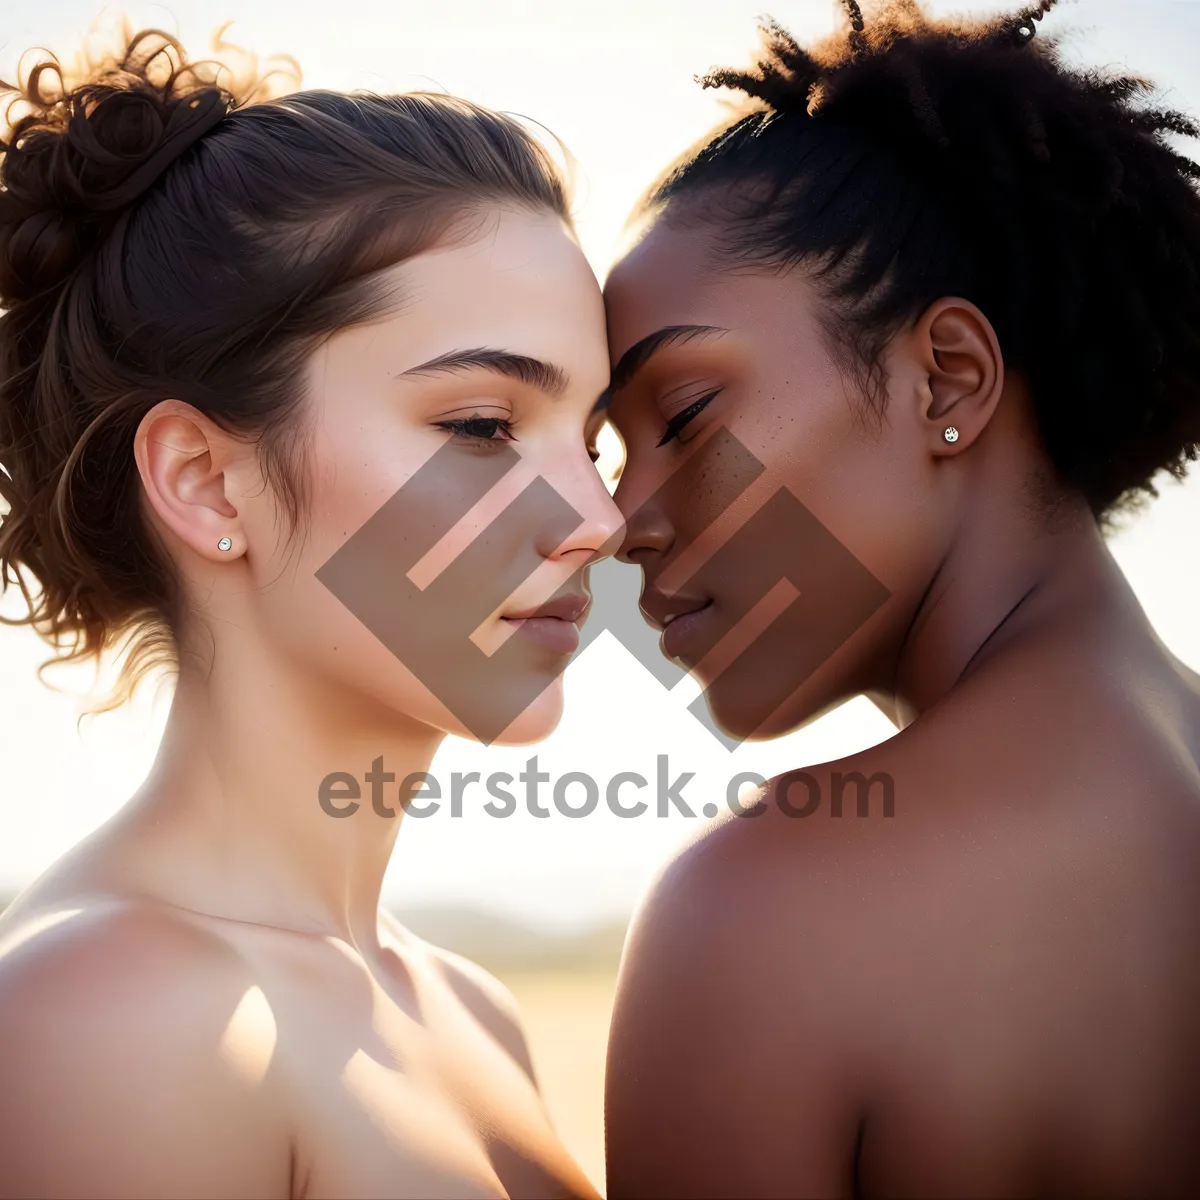 Picture of Romantic Couple Embracing in Happy Hug